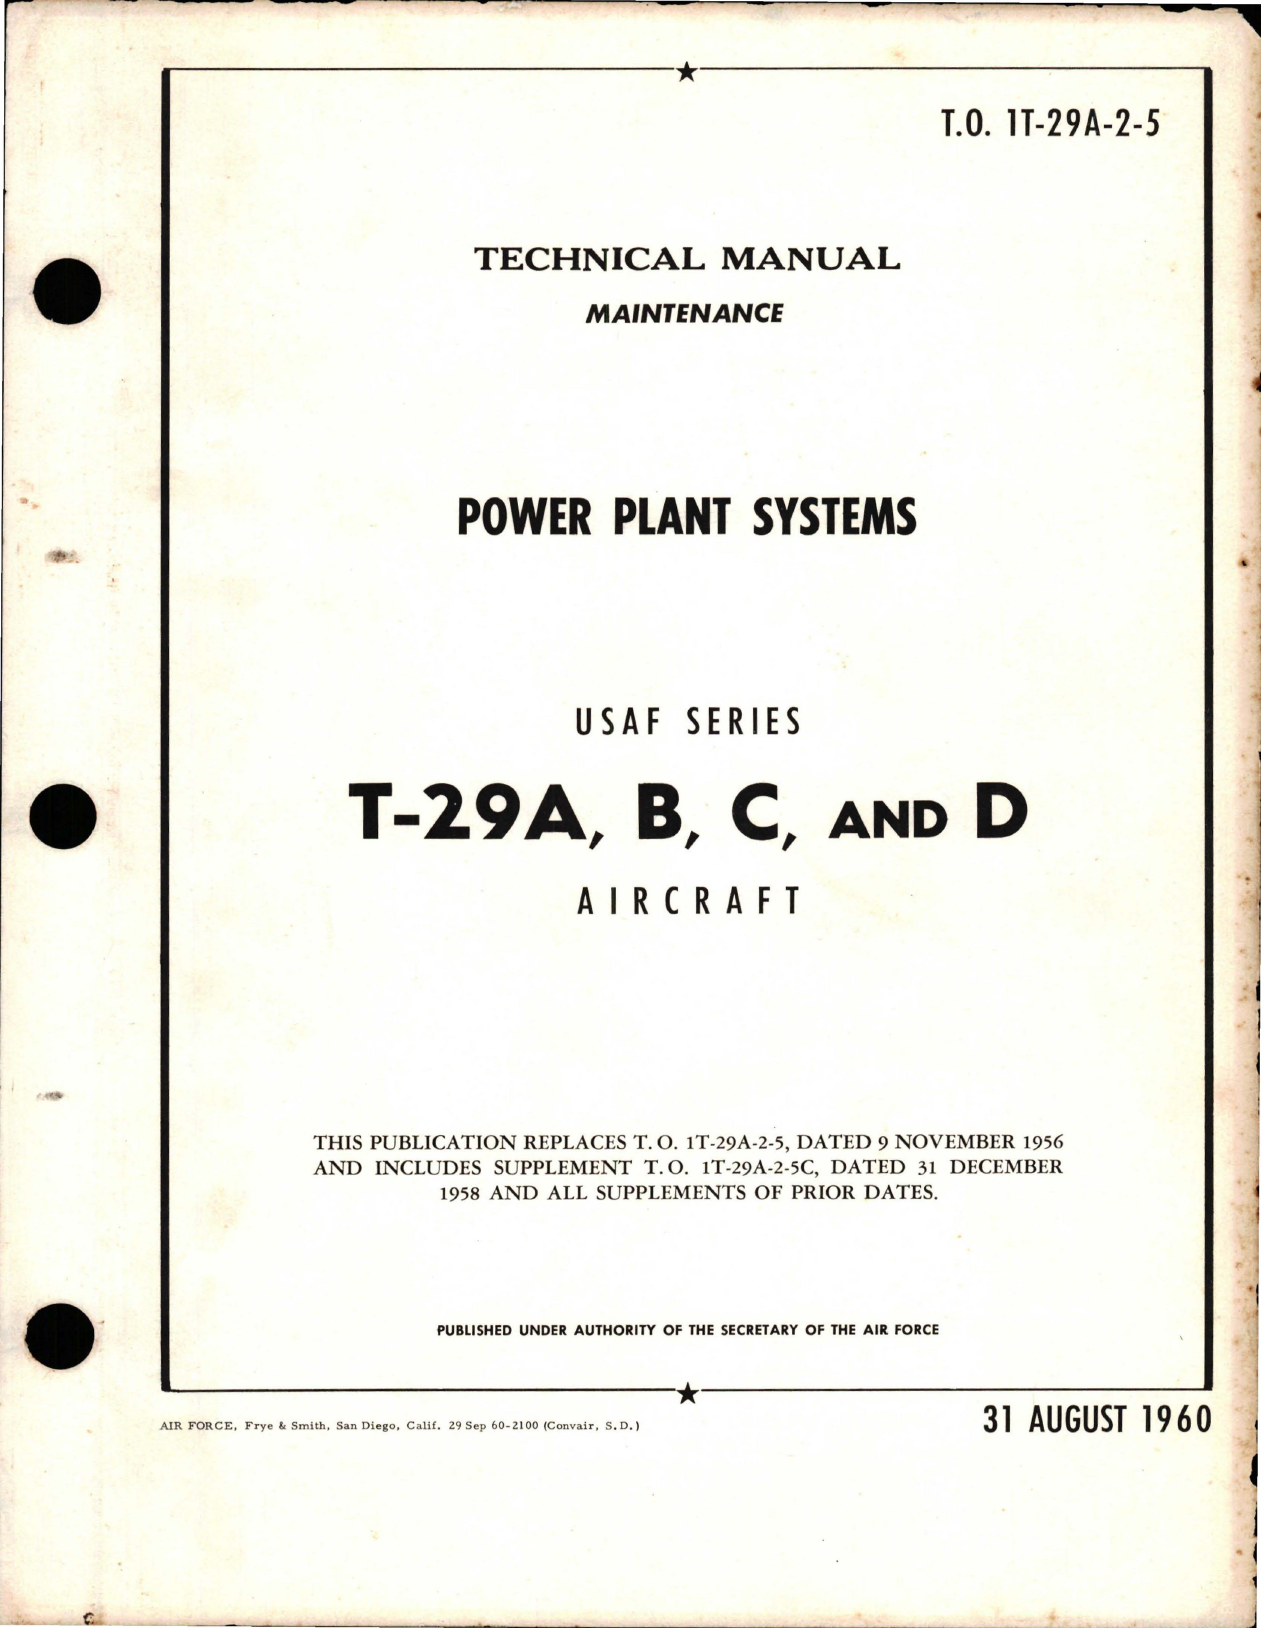 Sample page 1 from AirCorps Library document: Maintenance for Power Plant Systems for T-29A, T-29B, T-29C and T-29D